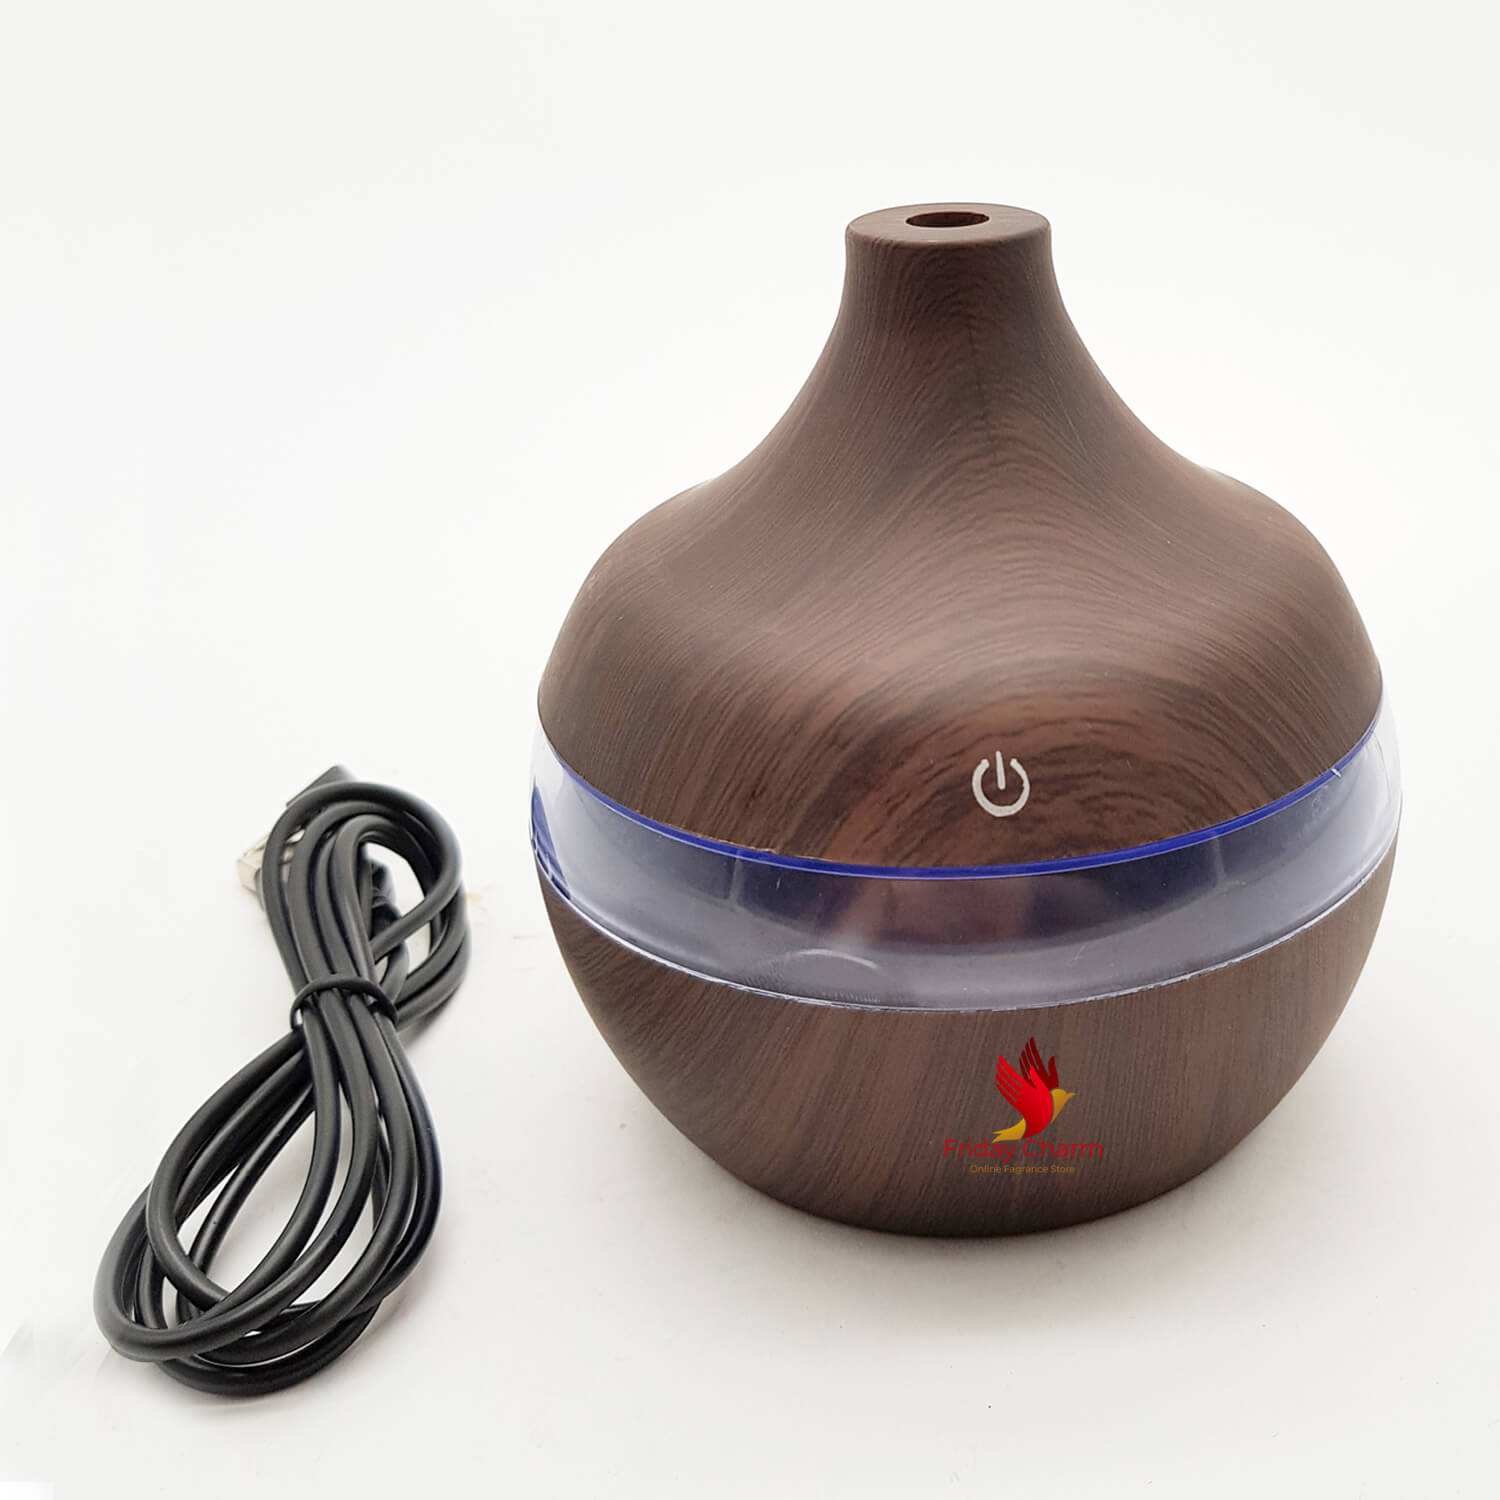 Electrical Aroma Oil Diffuser With Aroma Oil 1031 - Dark Brown